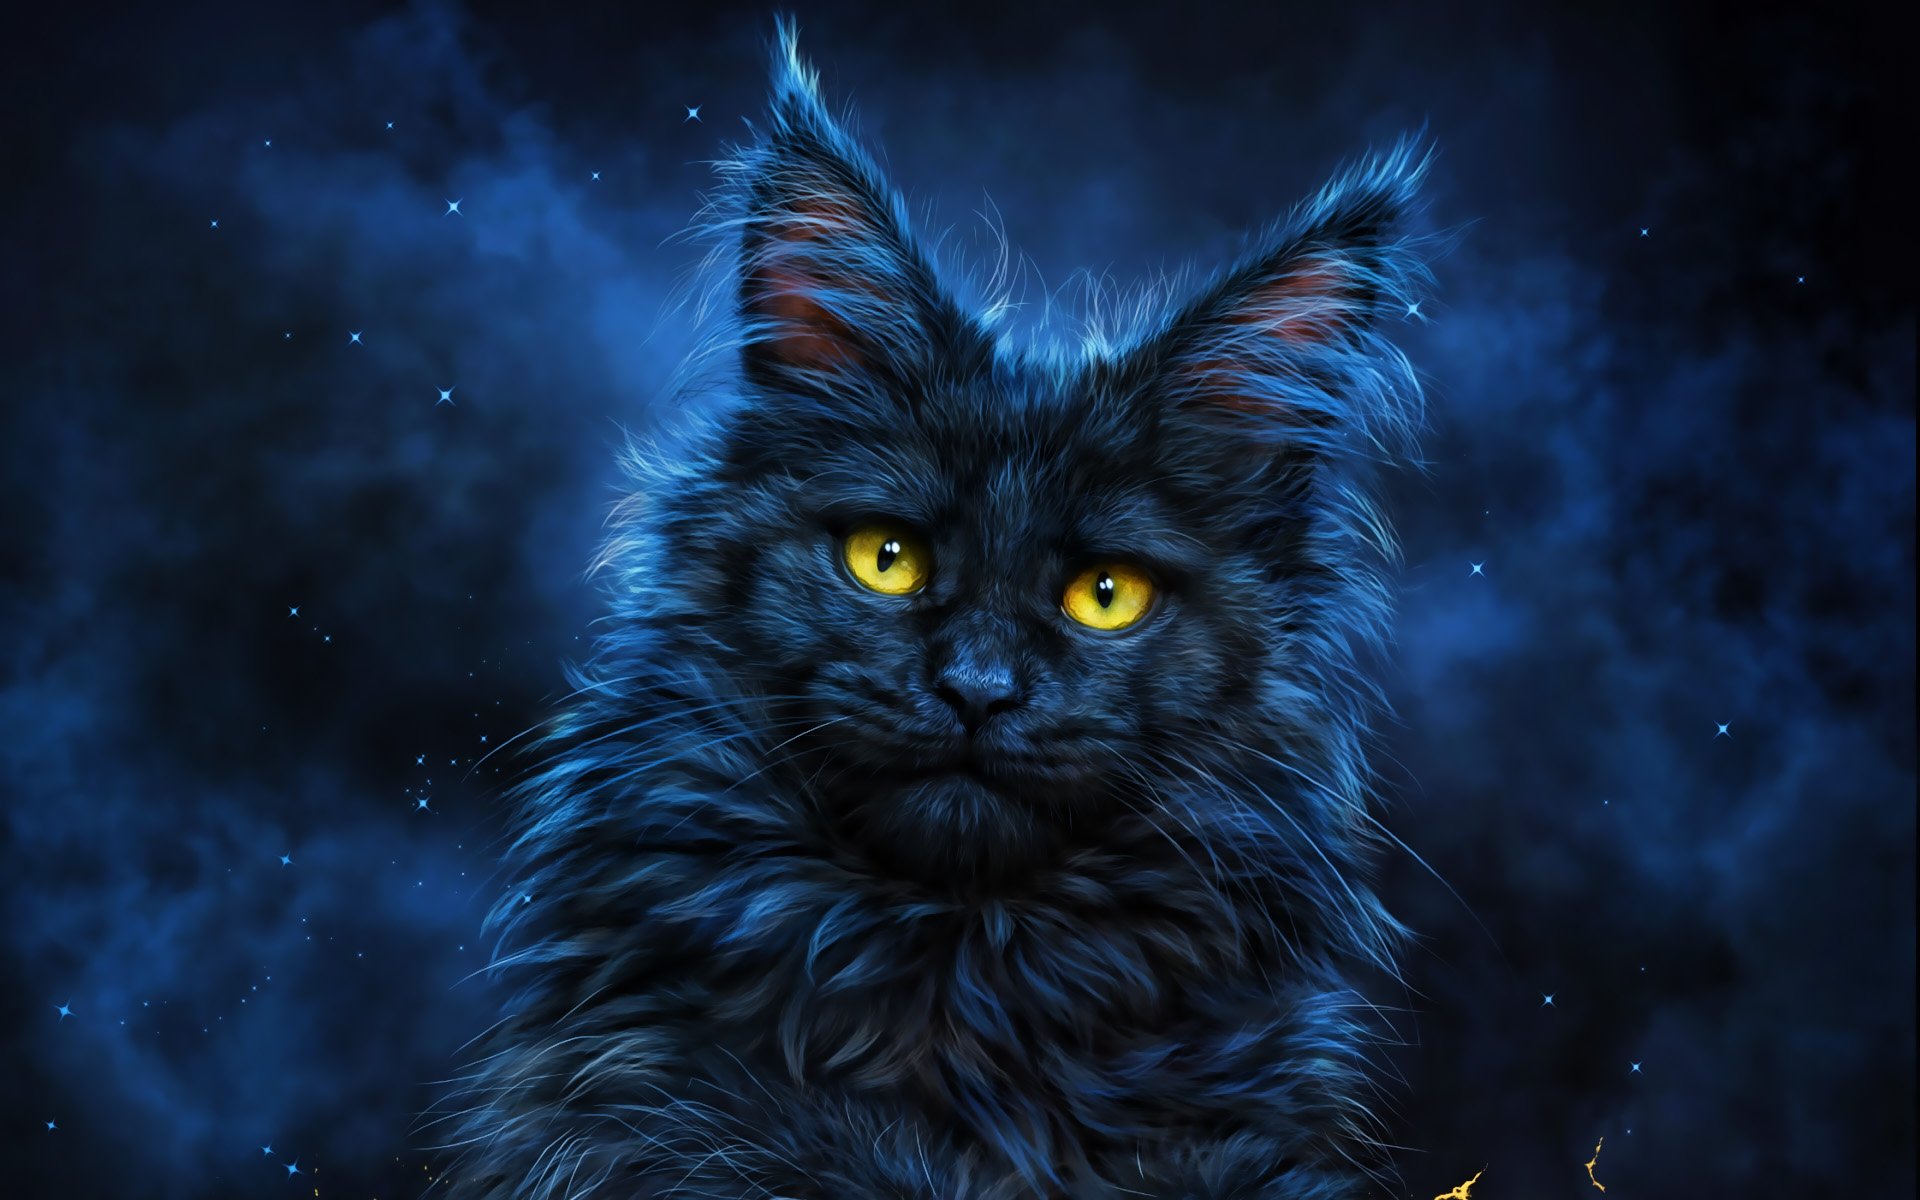 Download wallpapers black cat 3D art darkness pets cat with